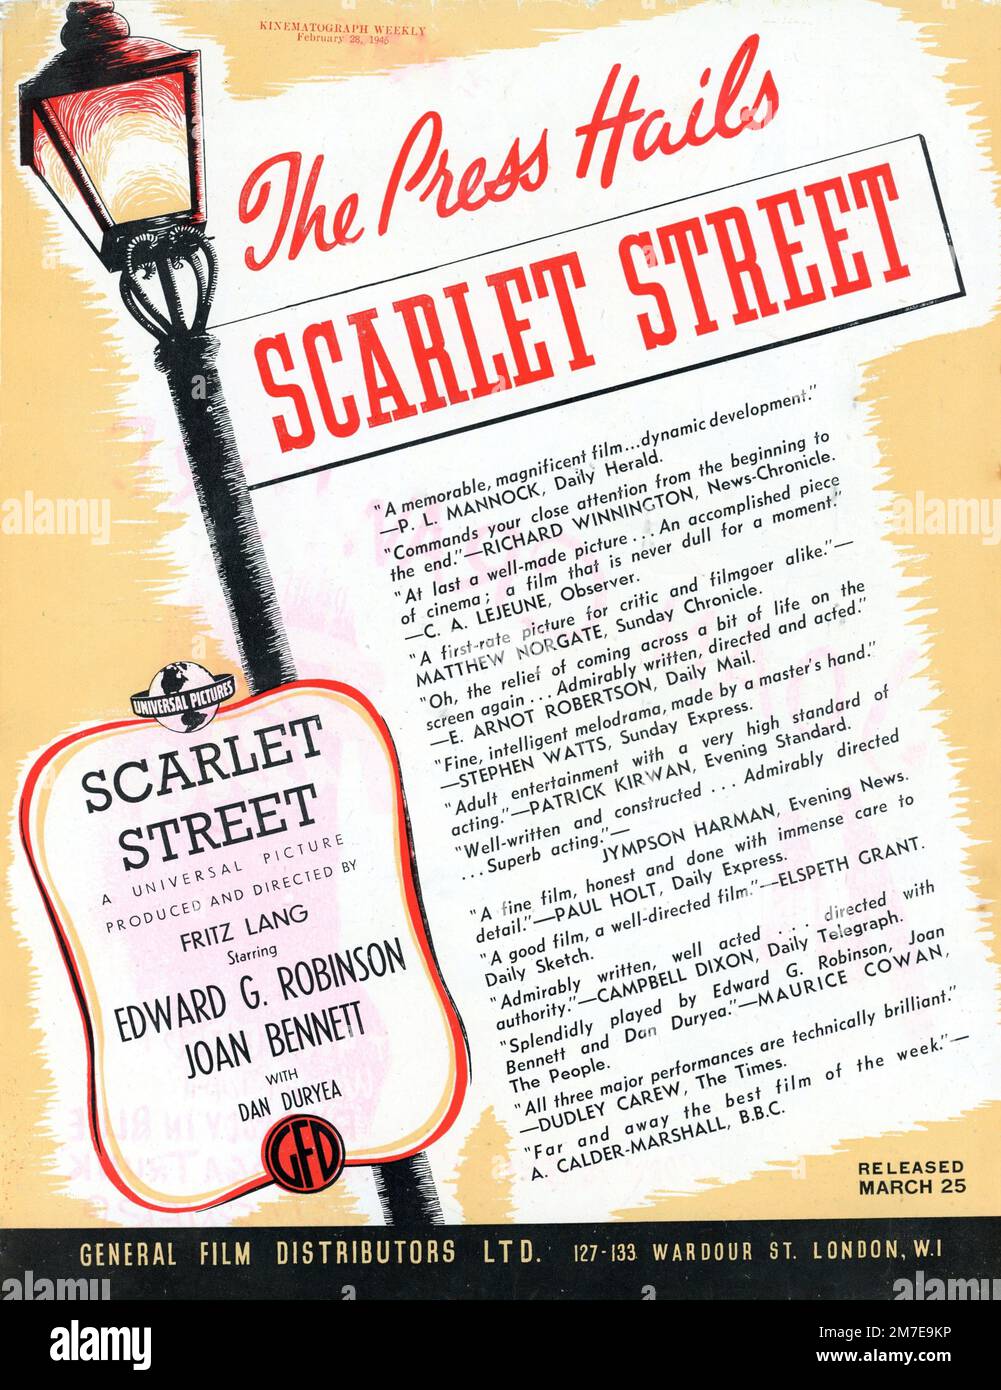 British Trade Ad for EDWARD G. ROBINSON JOAN BENNETT and DAN DURYEA in SCARLET STREET 1945 director FRITZ LANG screenplay Dudley Nichols music Hans J. Salter Fritz Lang Productions / Diana Production Company / Universal Pictures Stock Photo